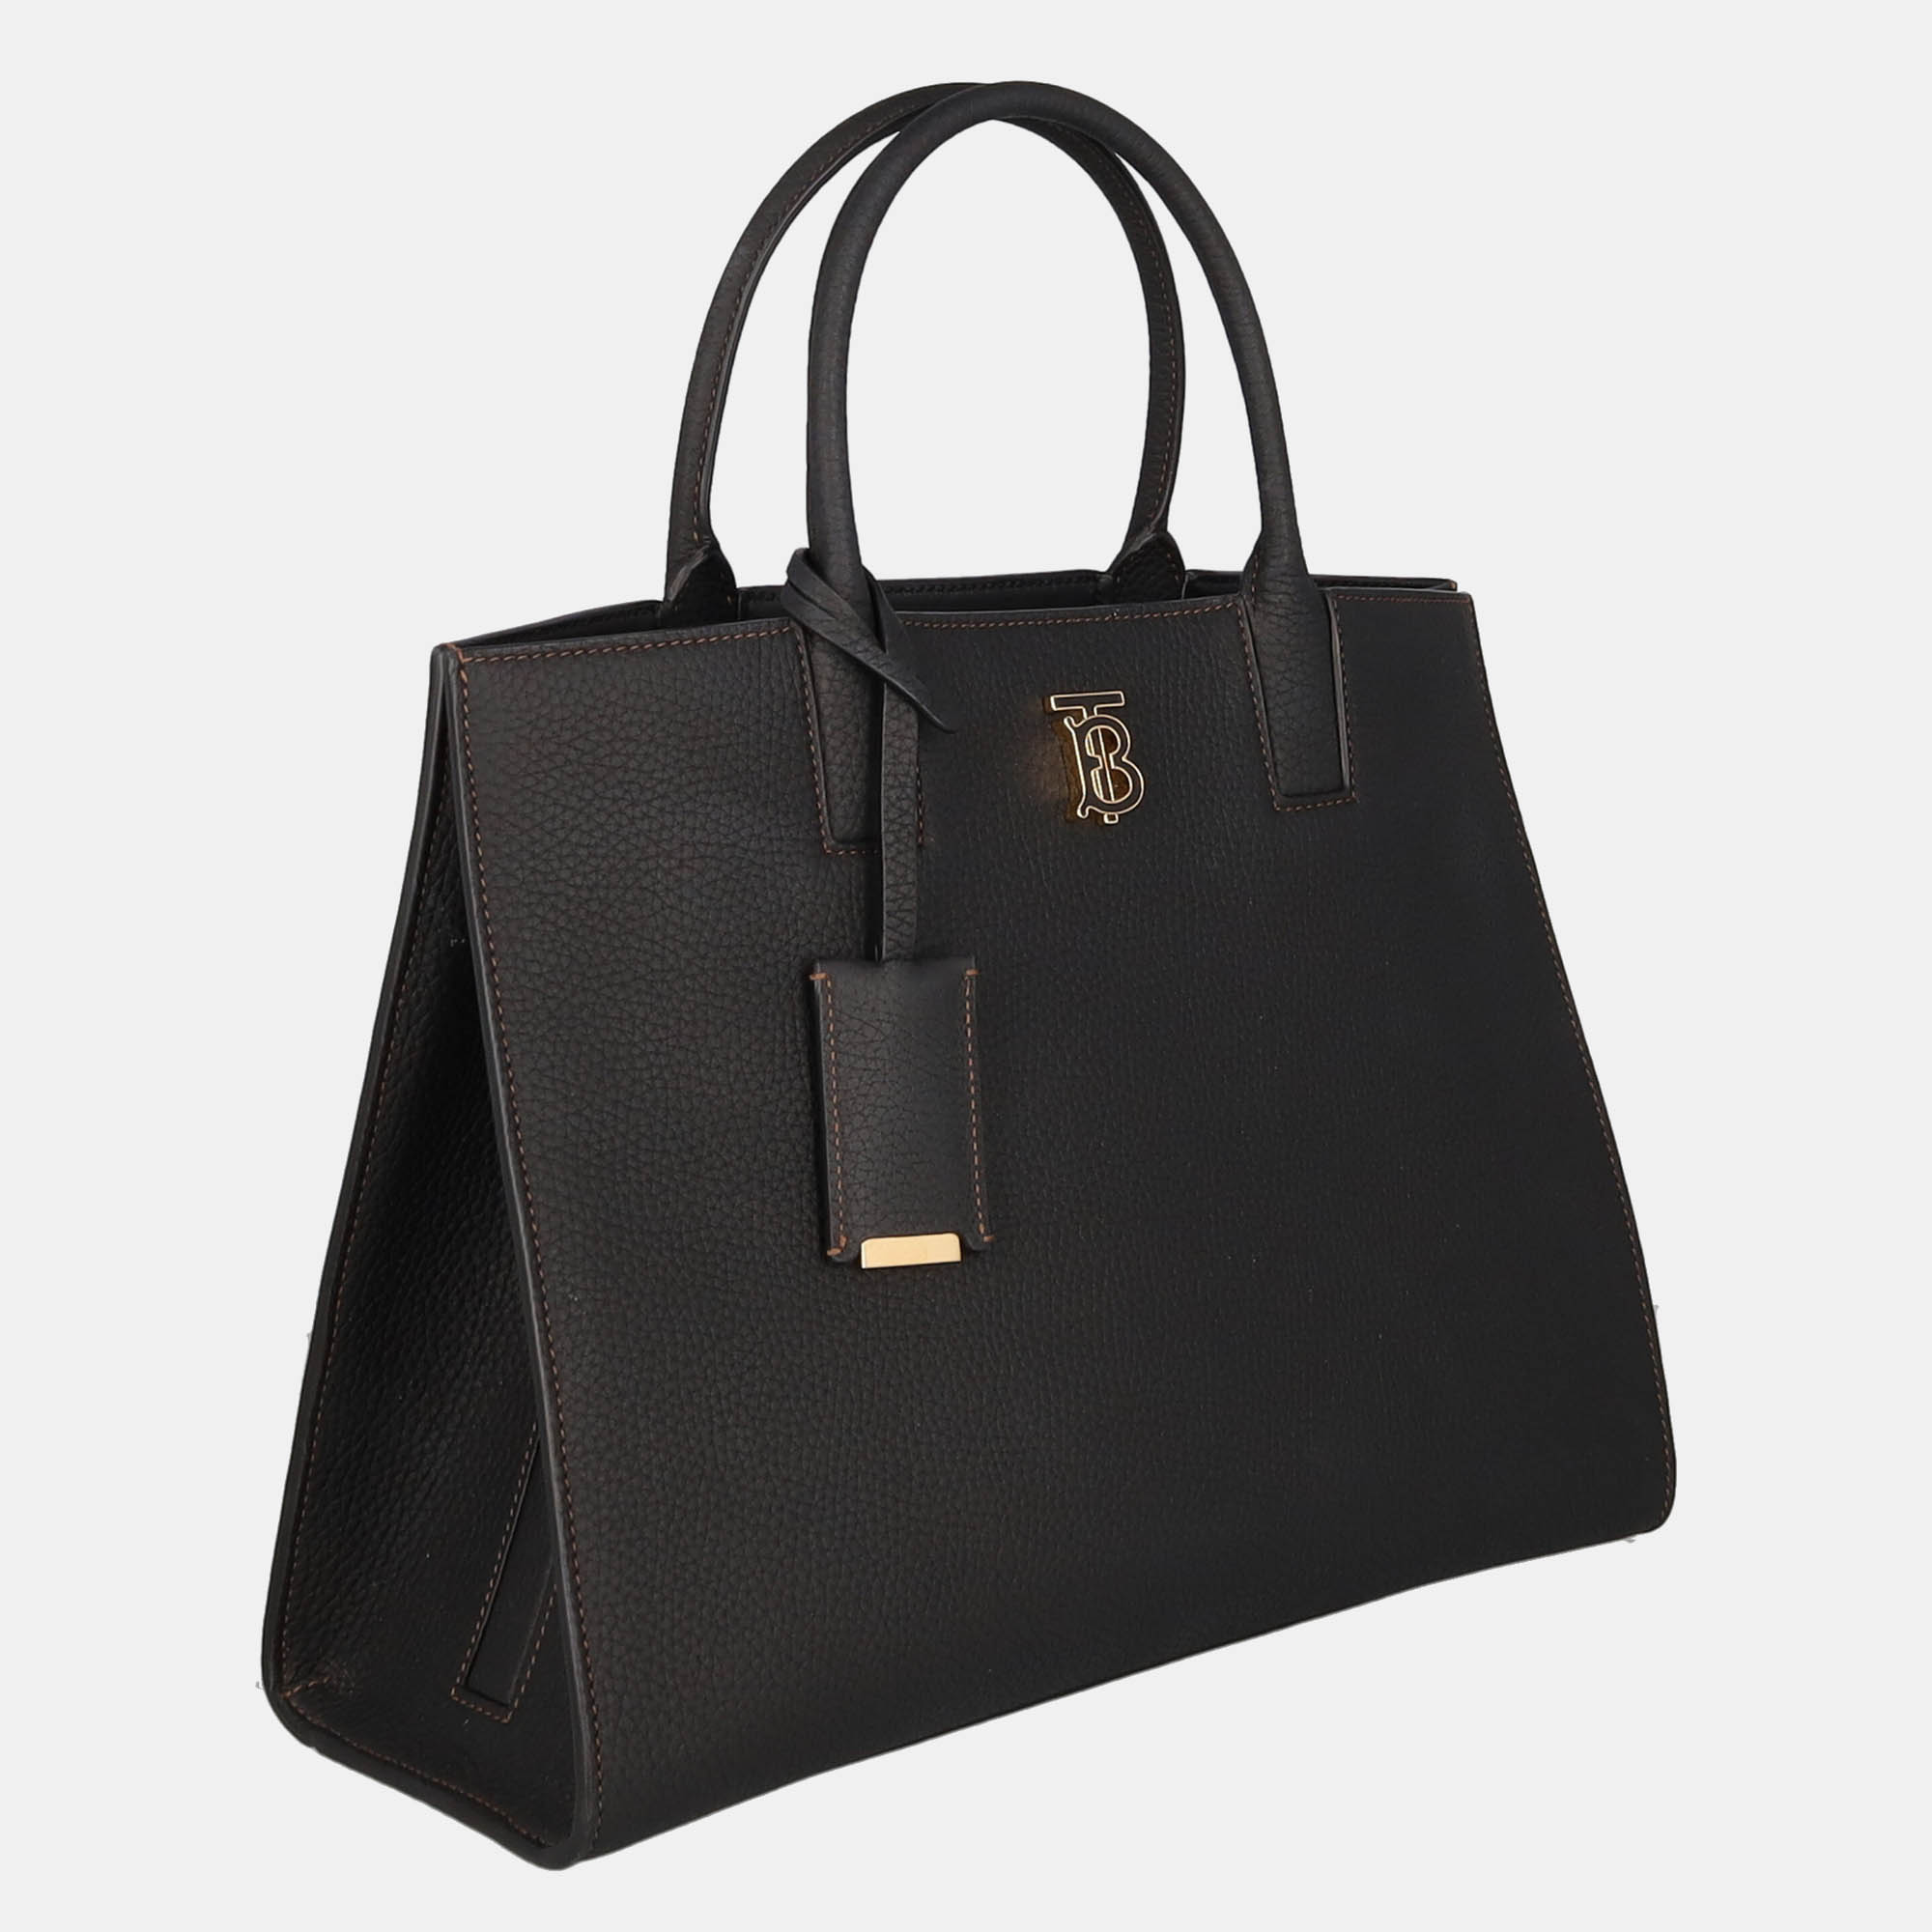 Burberry  Women's Leather Tote Bag - Black - One Size